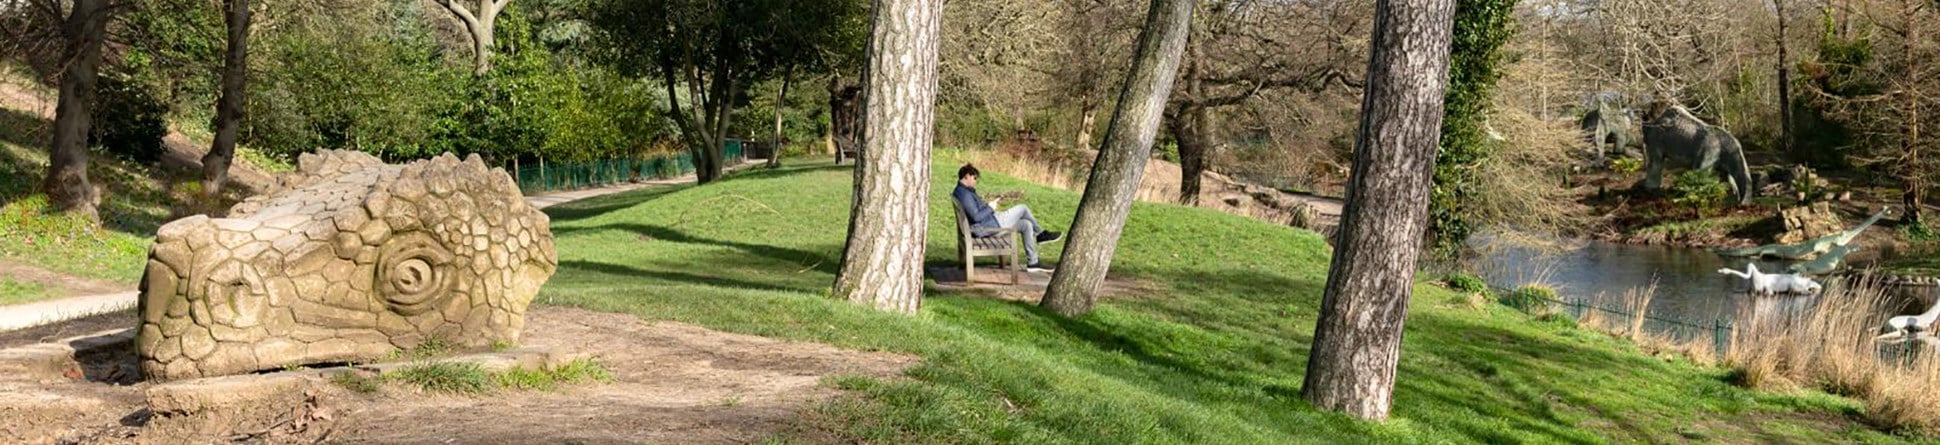 A man sits on a bench in parkland with dinosaur sculptures in front and behind him.